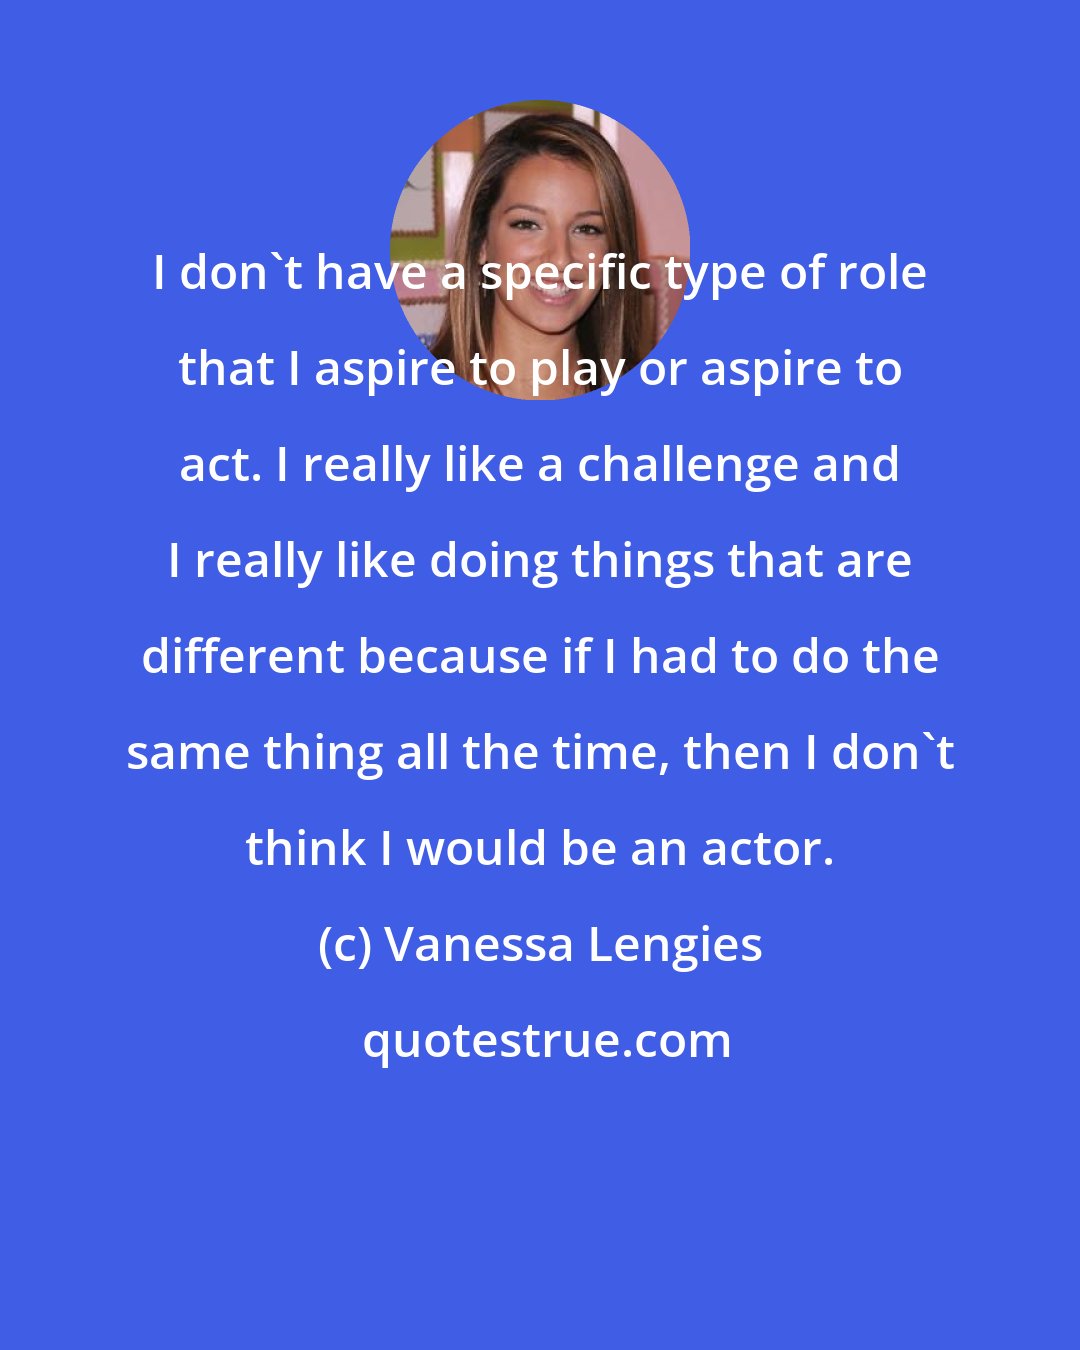 Vanessa Lengies: I don't have a specific type of role that I aspire to play or aspire to act. I really like a challenge and I really like doing things that are different because if I had to do the same thing all the time, then I don't think I would be an actor.